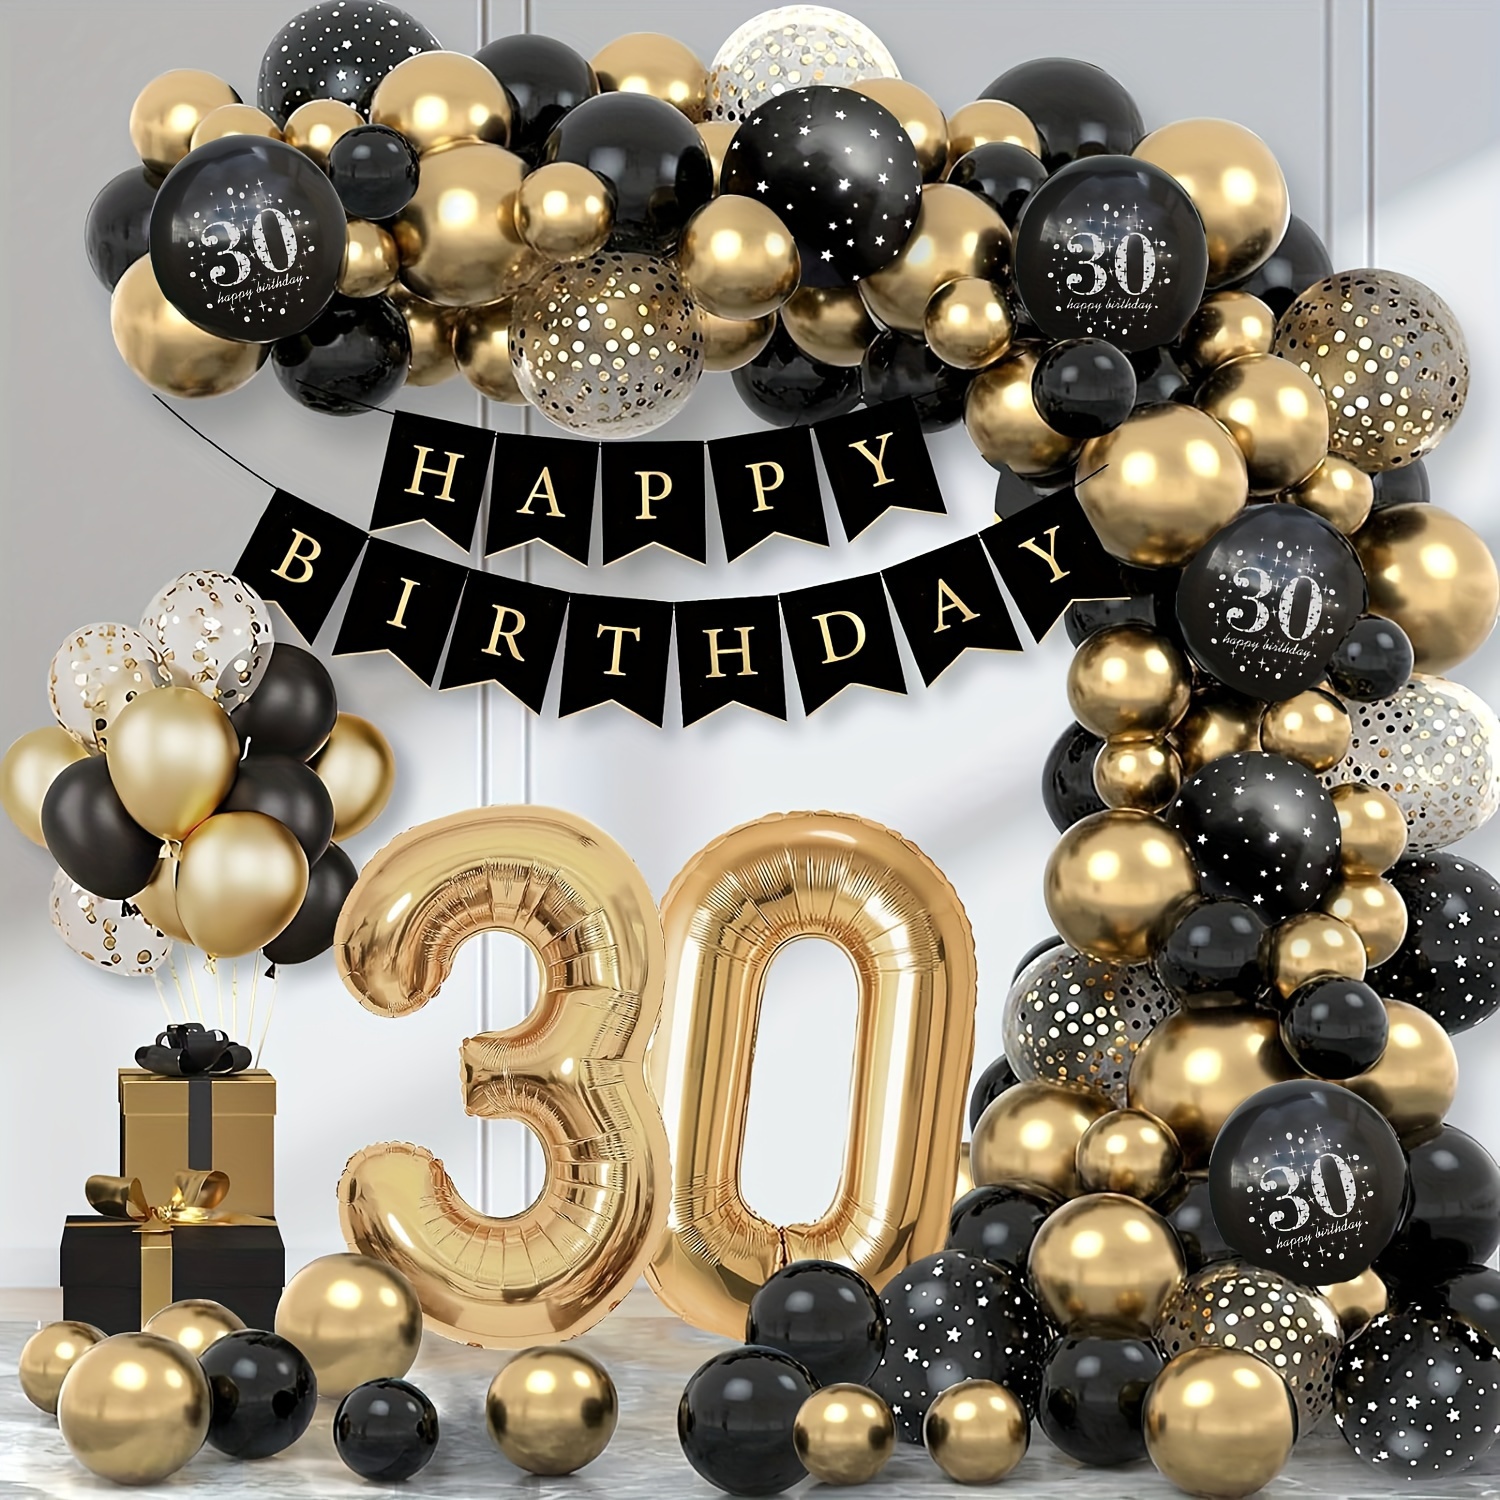 

Set, 30th Birthday Party Decoration, Black Golden Balloons Decoration With Happy Birthday Banner, Number 30 Balloon, For Woman Man Birthday Gift, Balloon Garland Birthday Party Decoration,